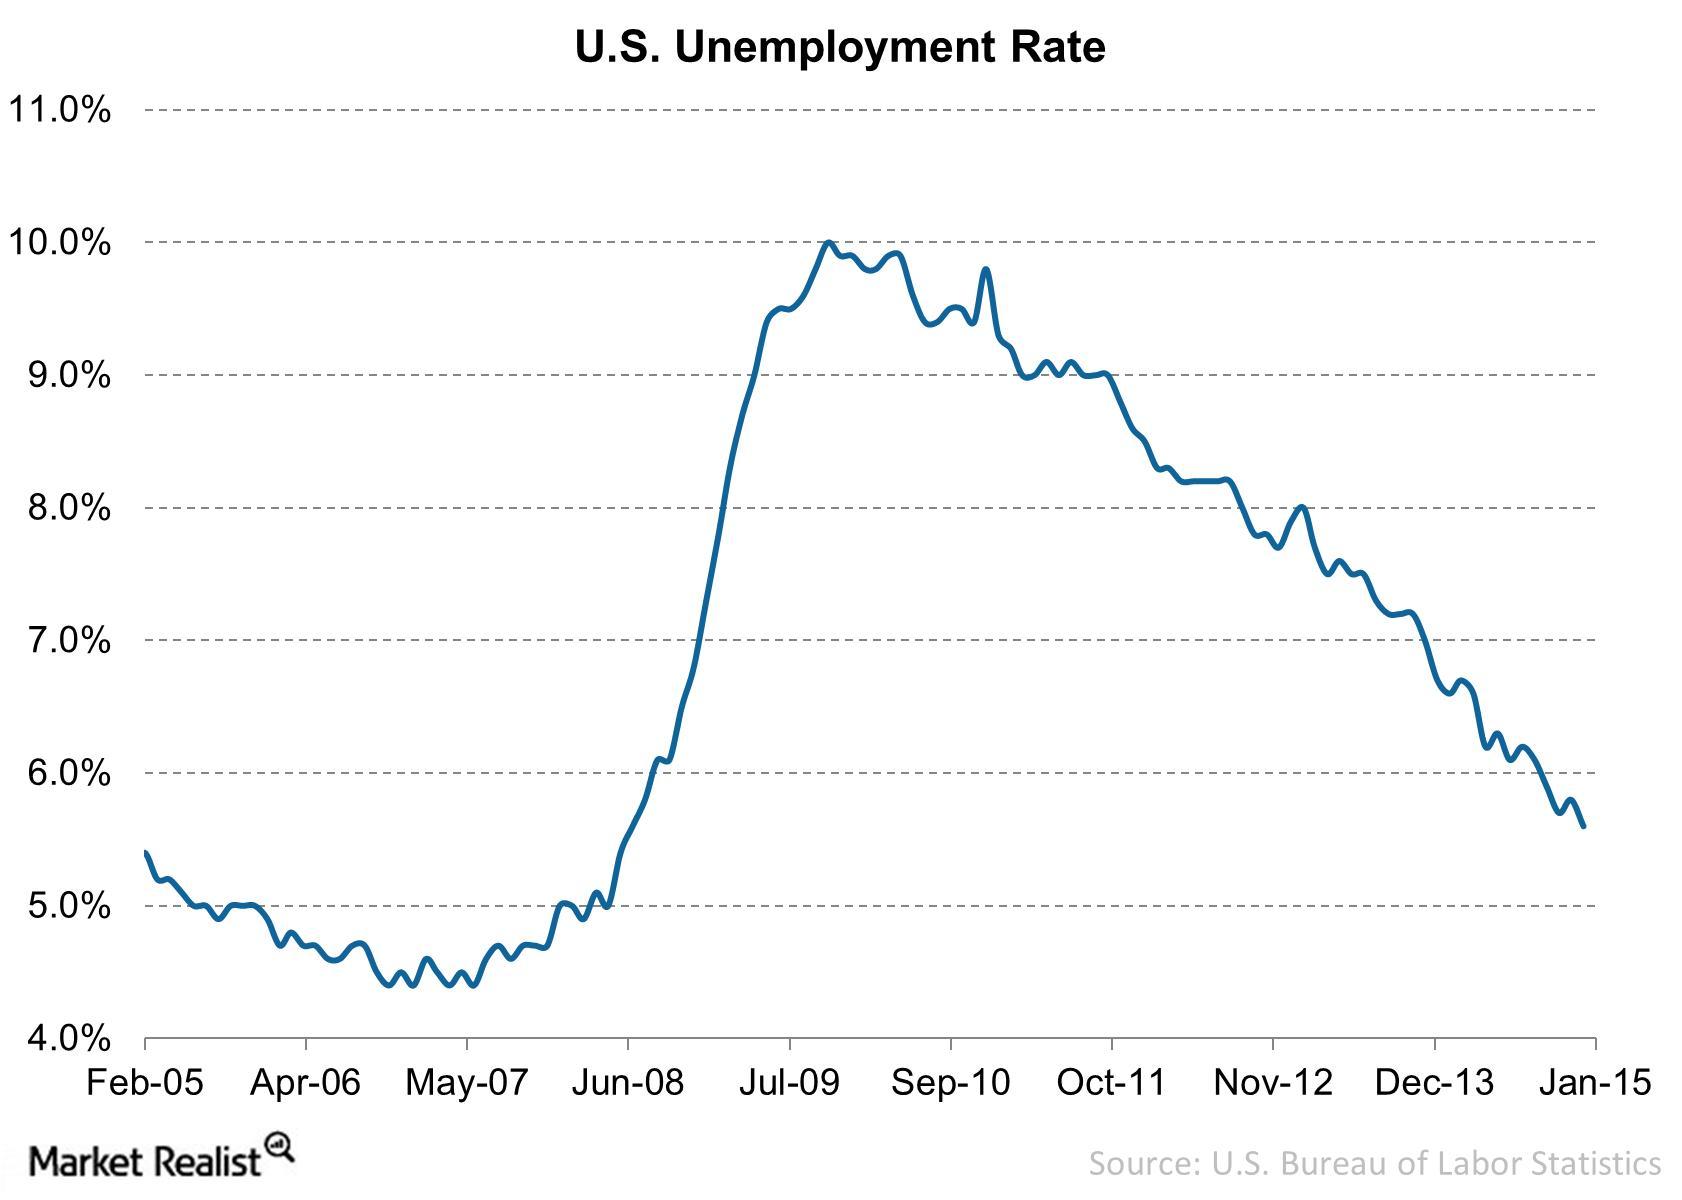 US unemployment rate hits sixyear low, another plus for leisure